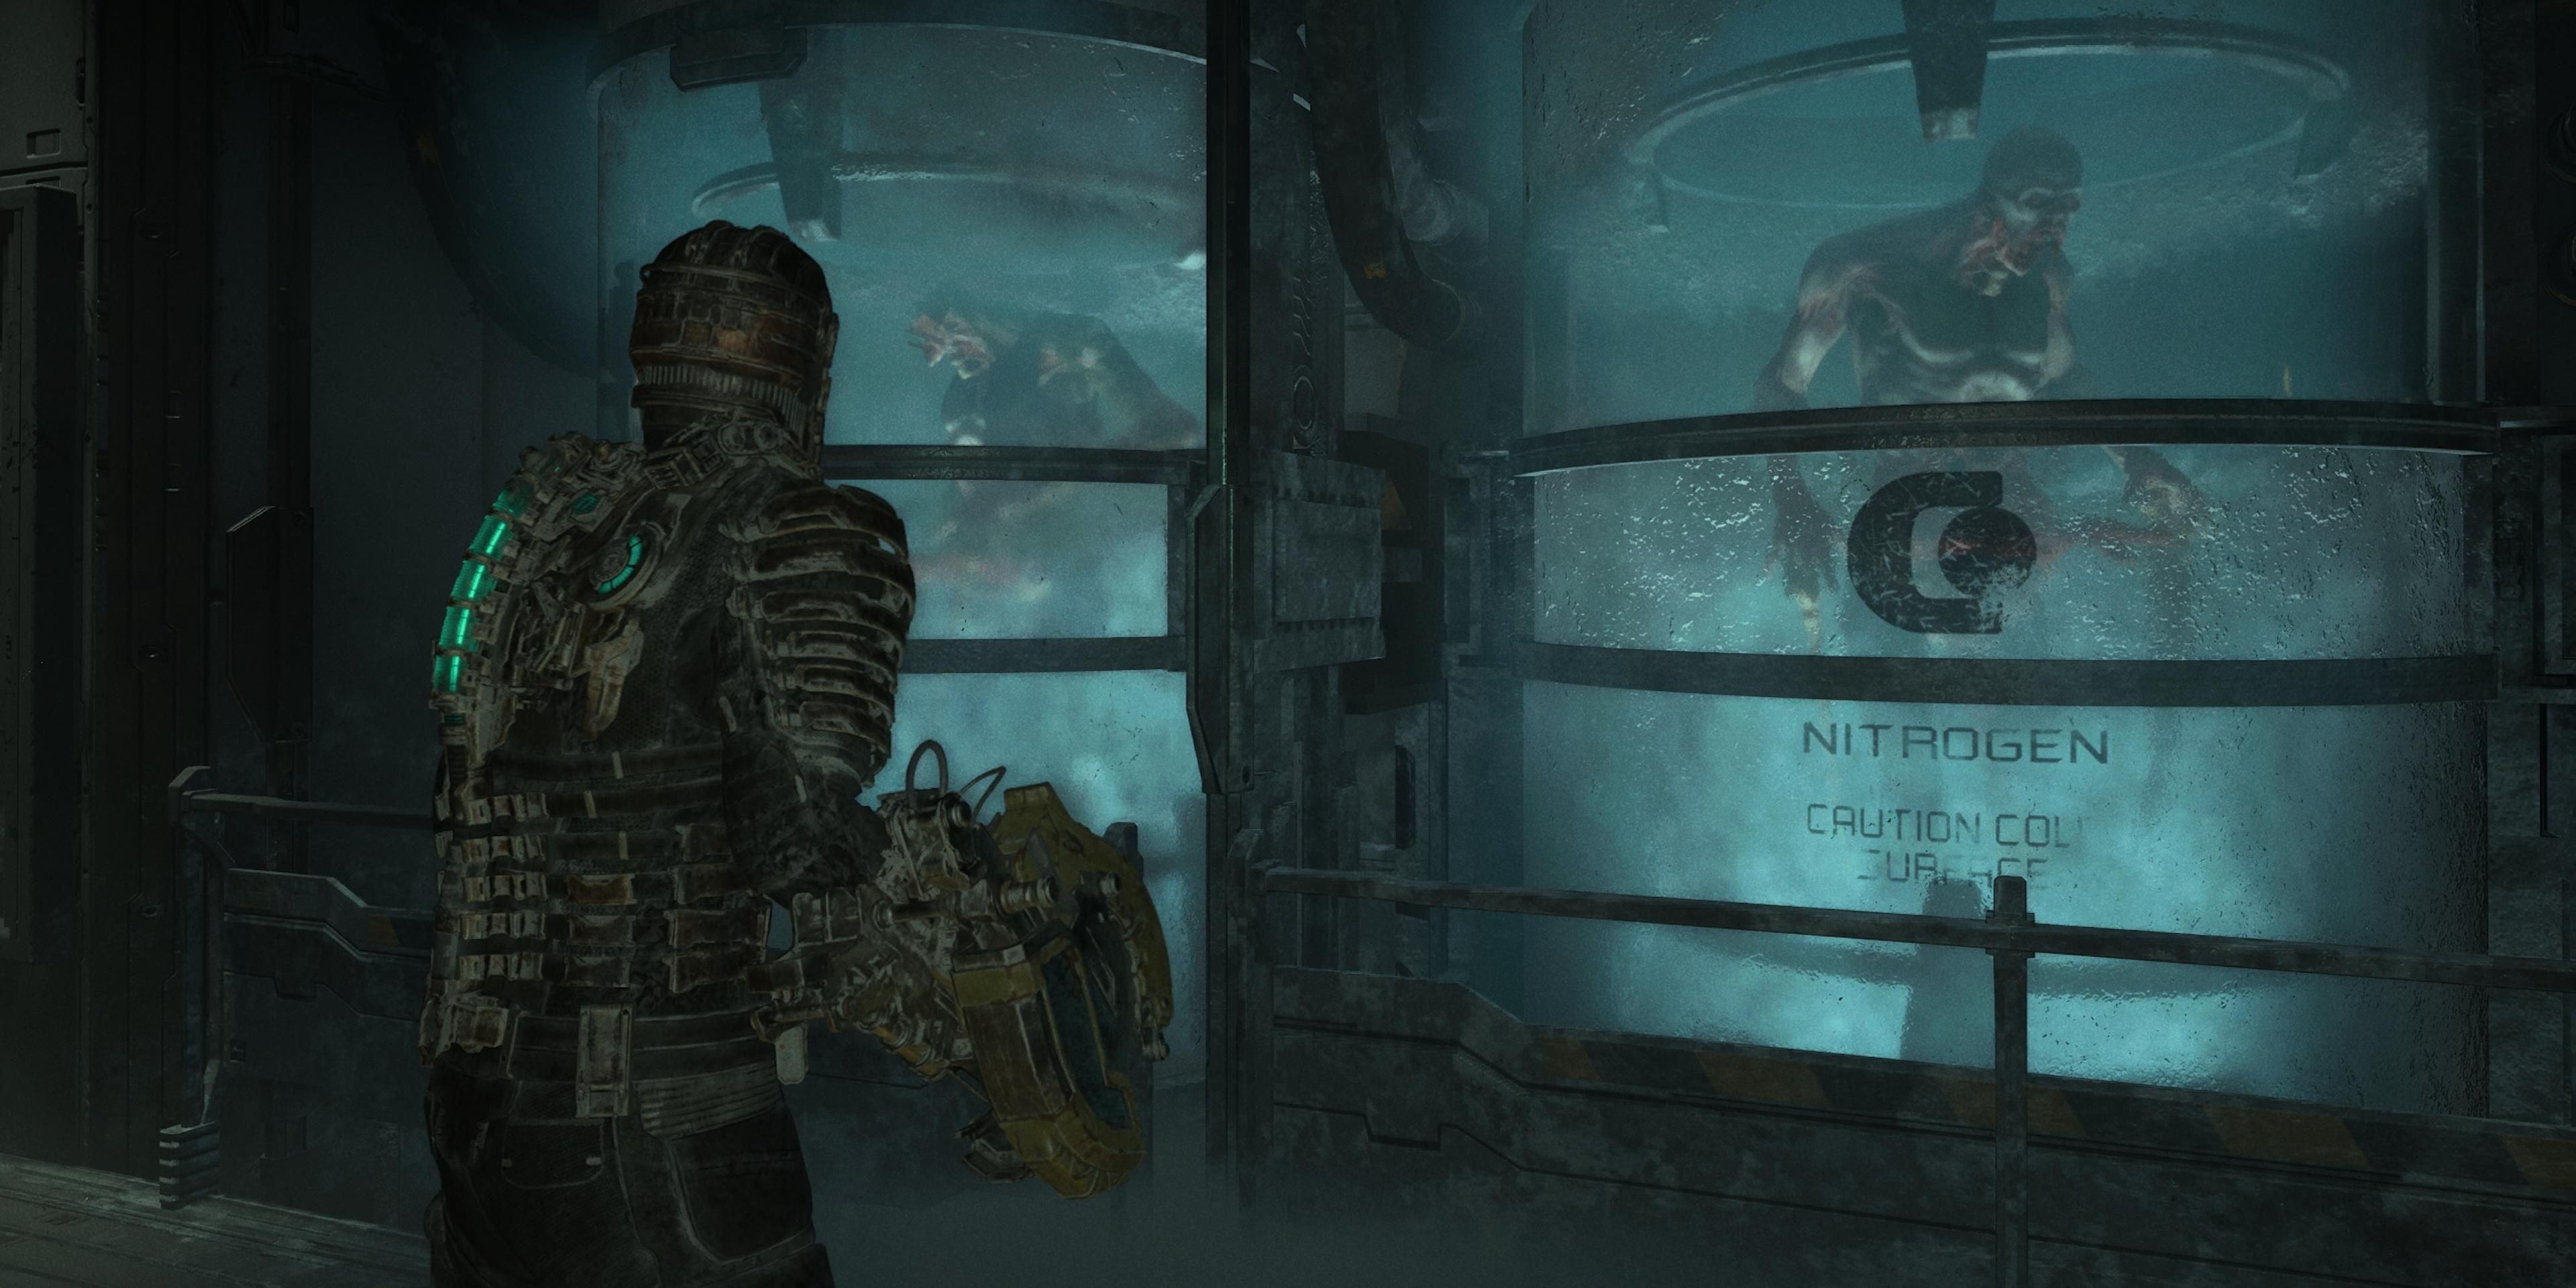 Isaac looking at cold chambers containing necromorphs in Dead Space